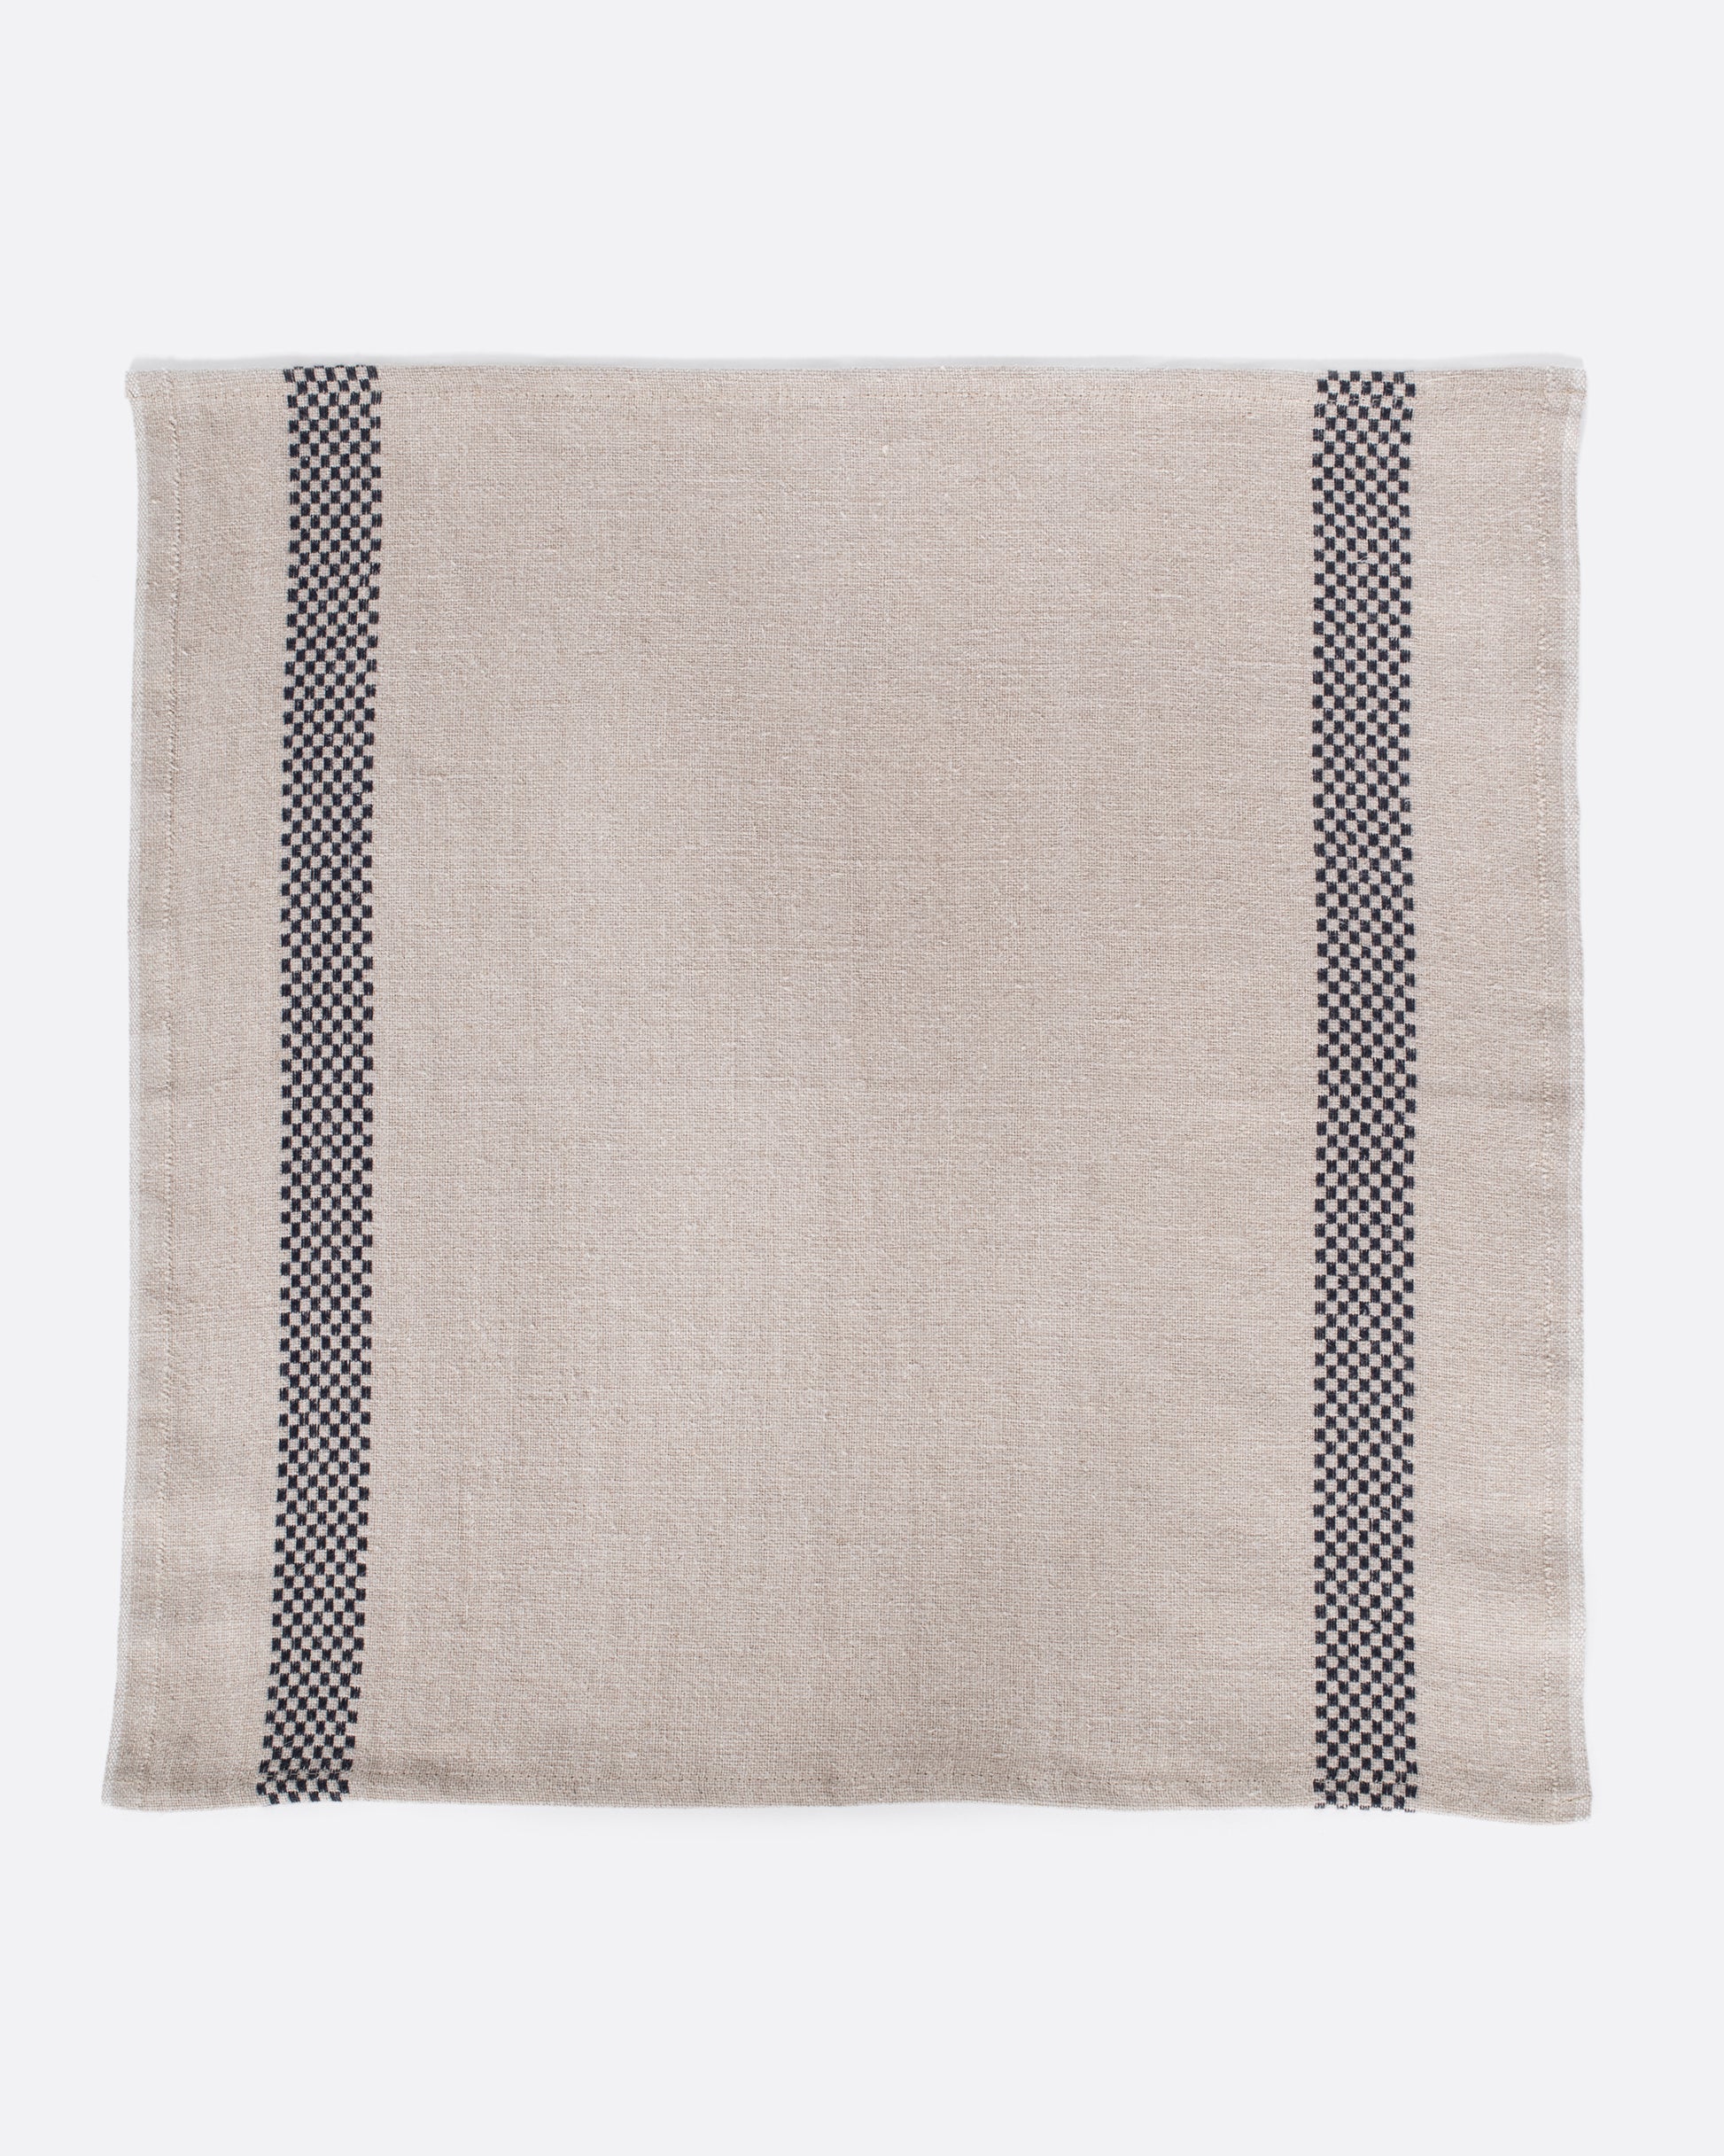 Natural linen napkin with black checkered embroidery